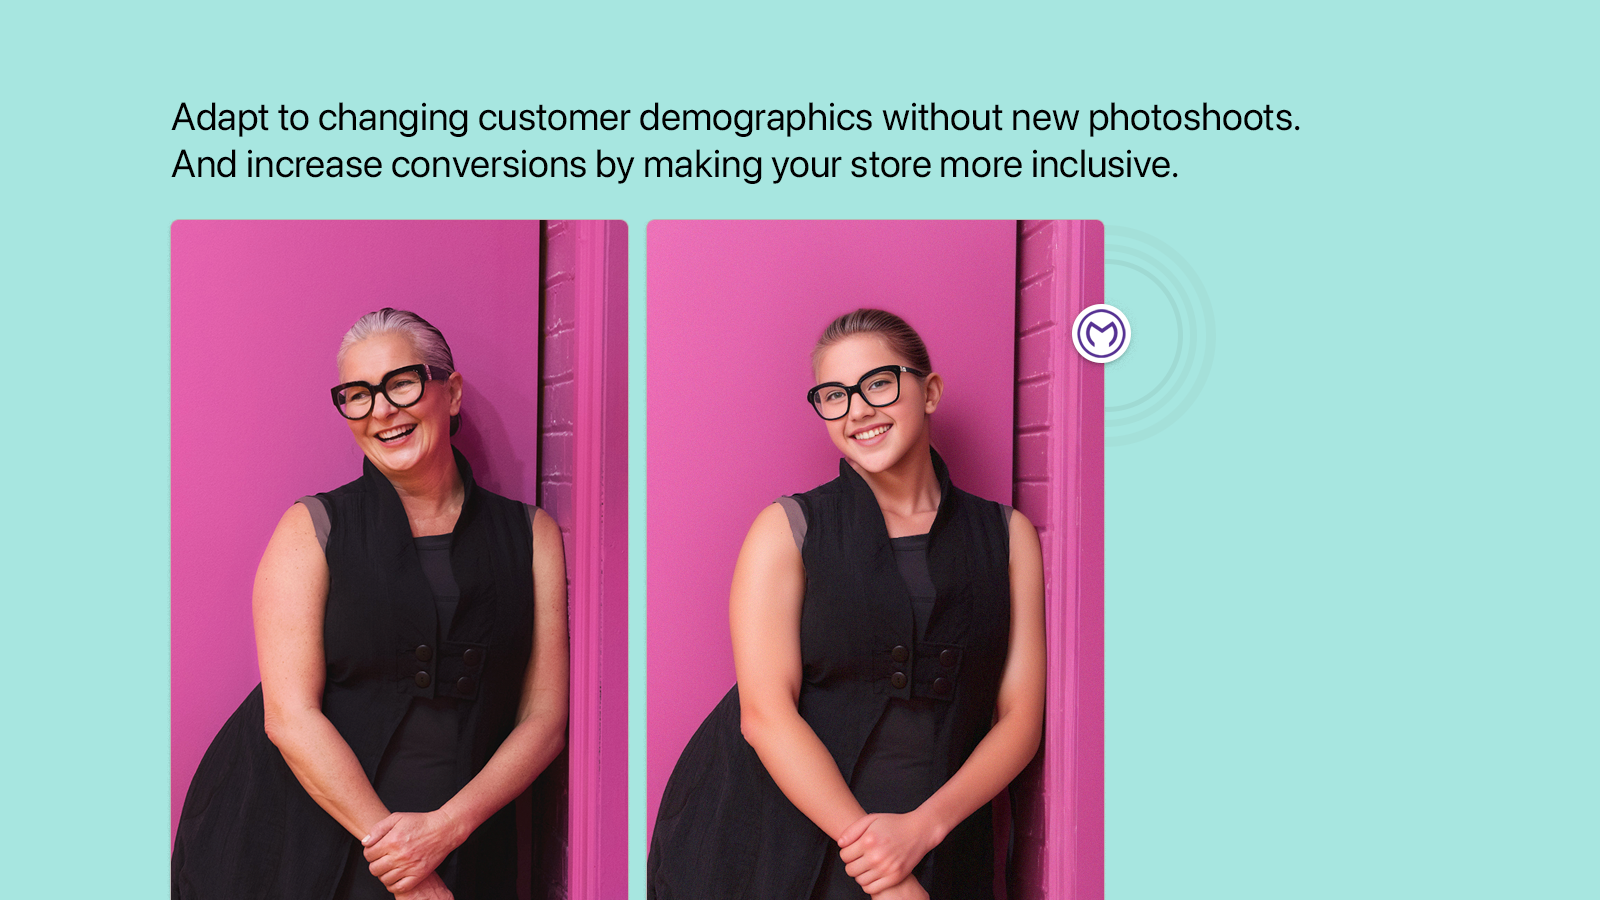 Adapt to changing customer demographics without new photoshoots.